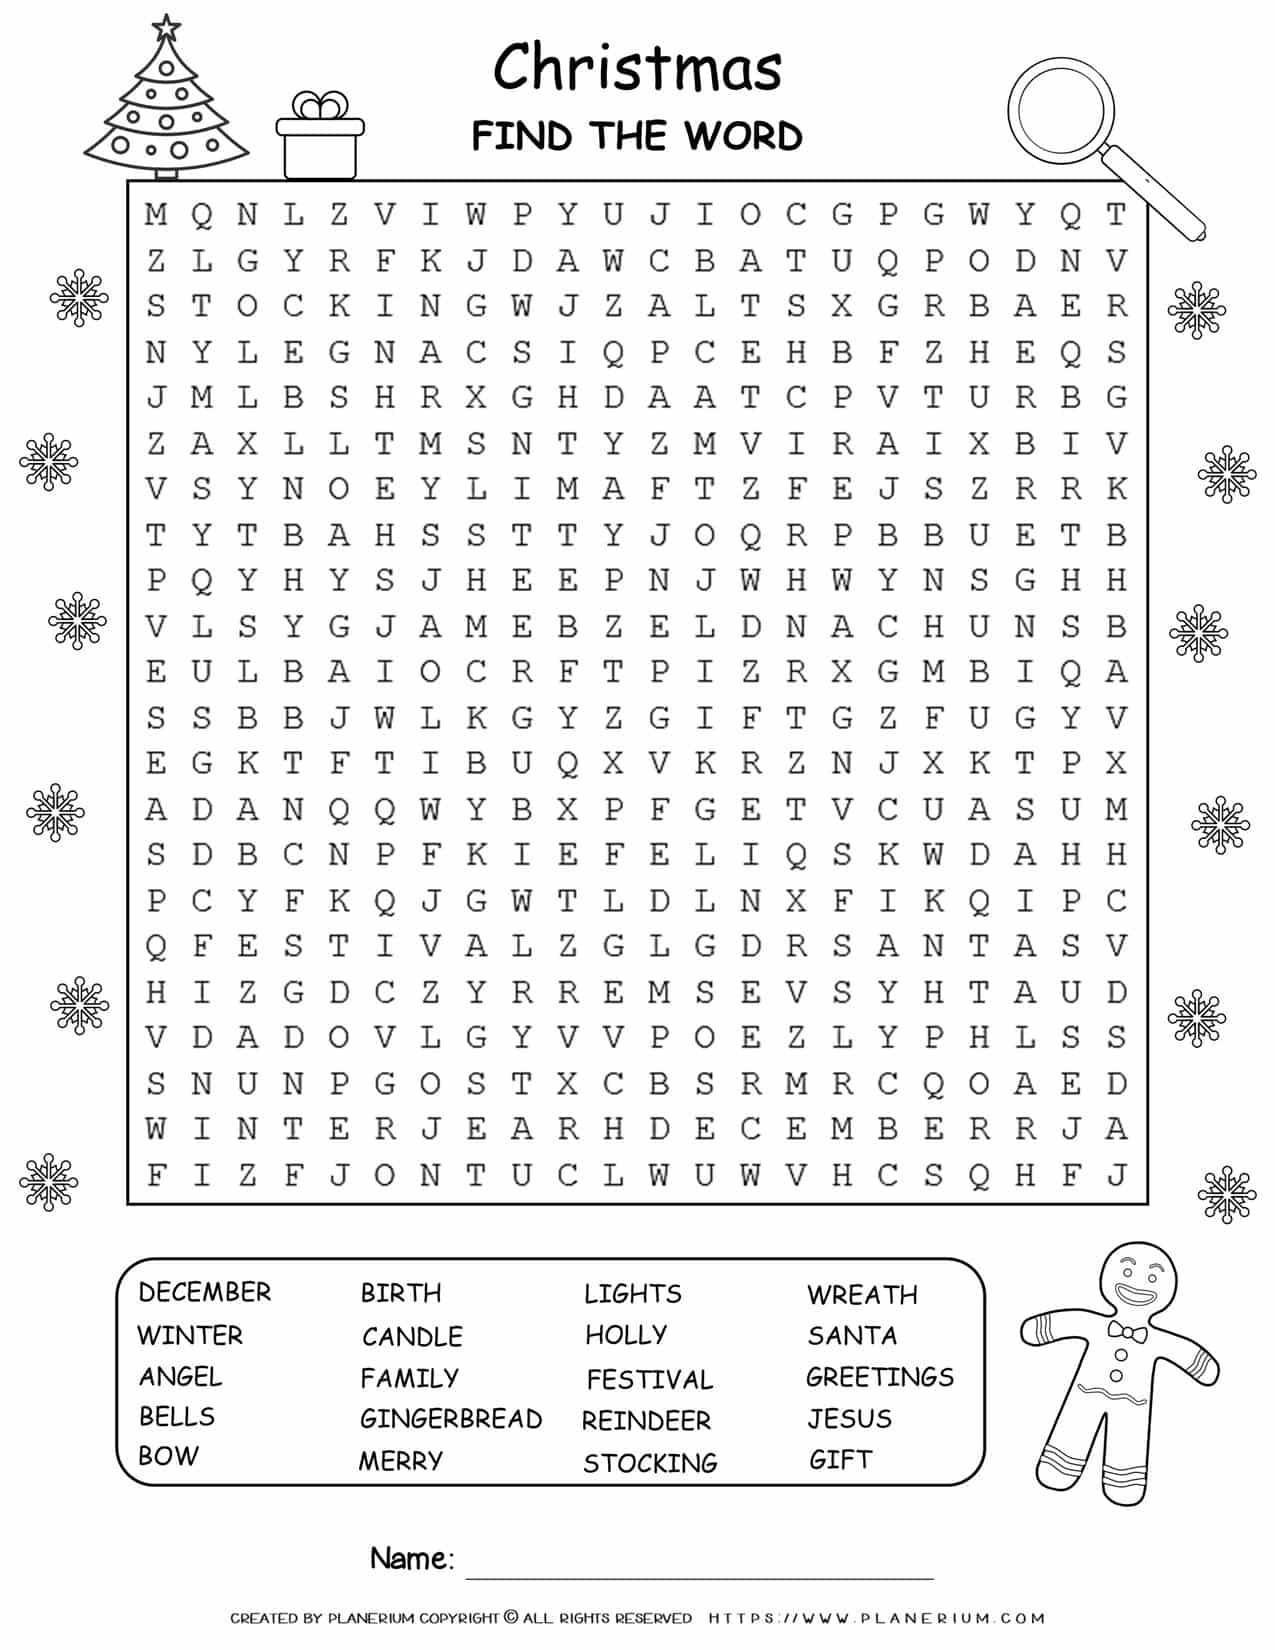 Christmas Find the Word Puzzle | Free Printables | Planerium